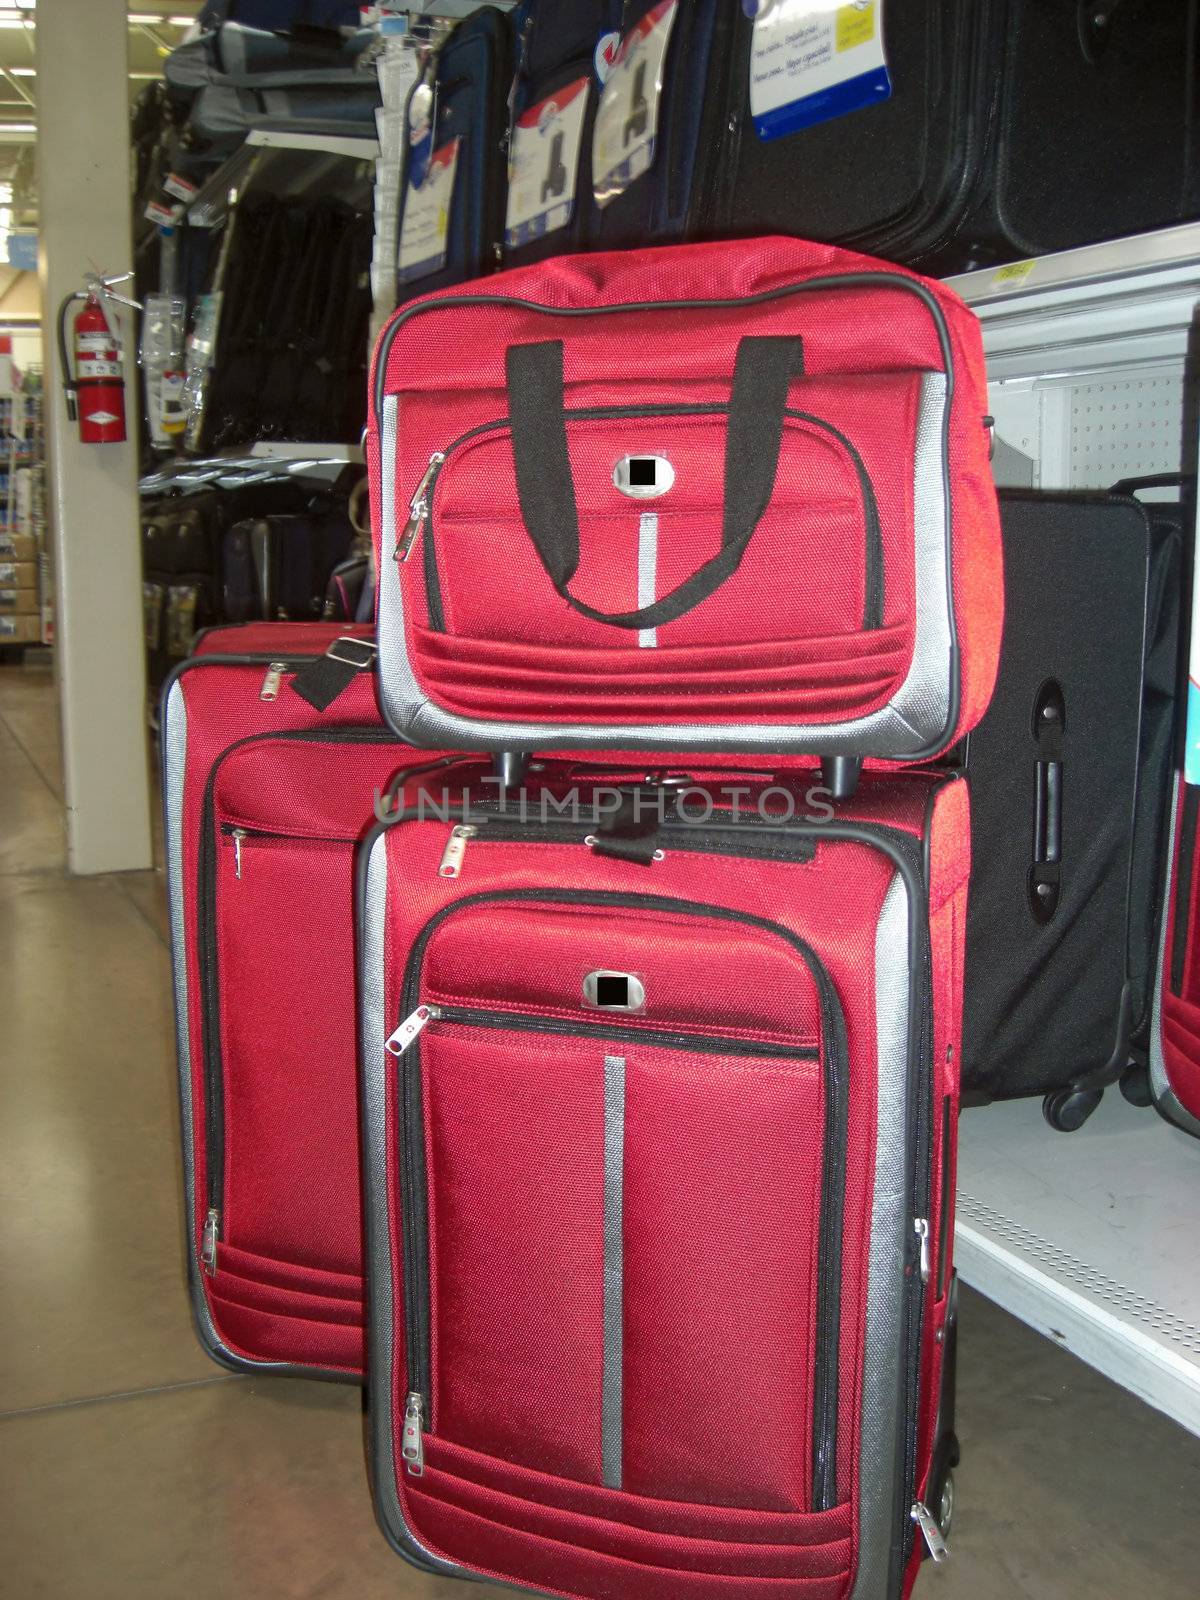 A set of red travelling bags are displayed in front of black and navy blues bags in a luggage store